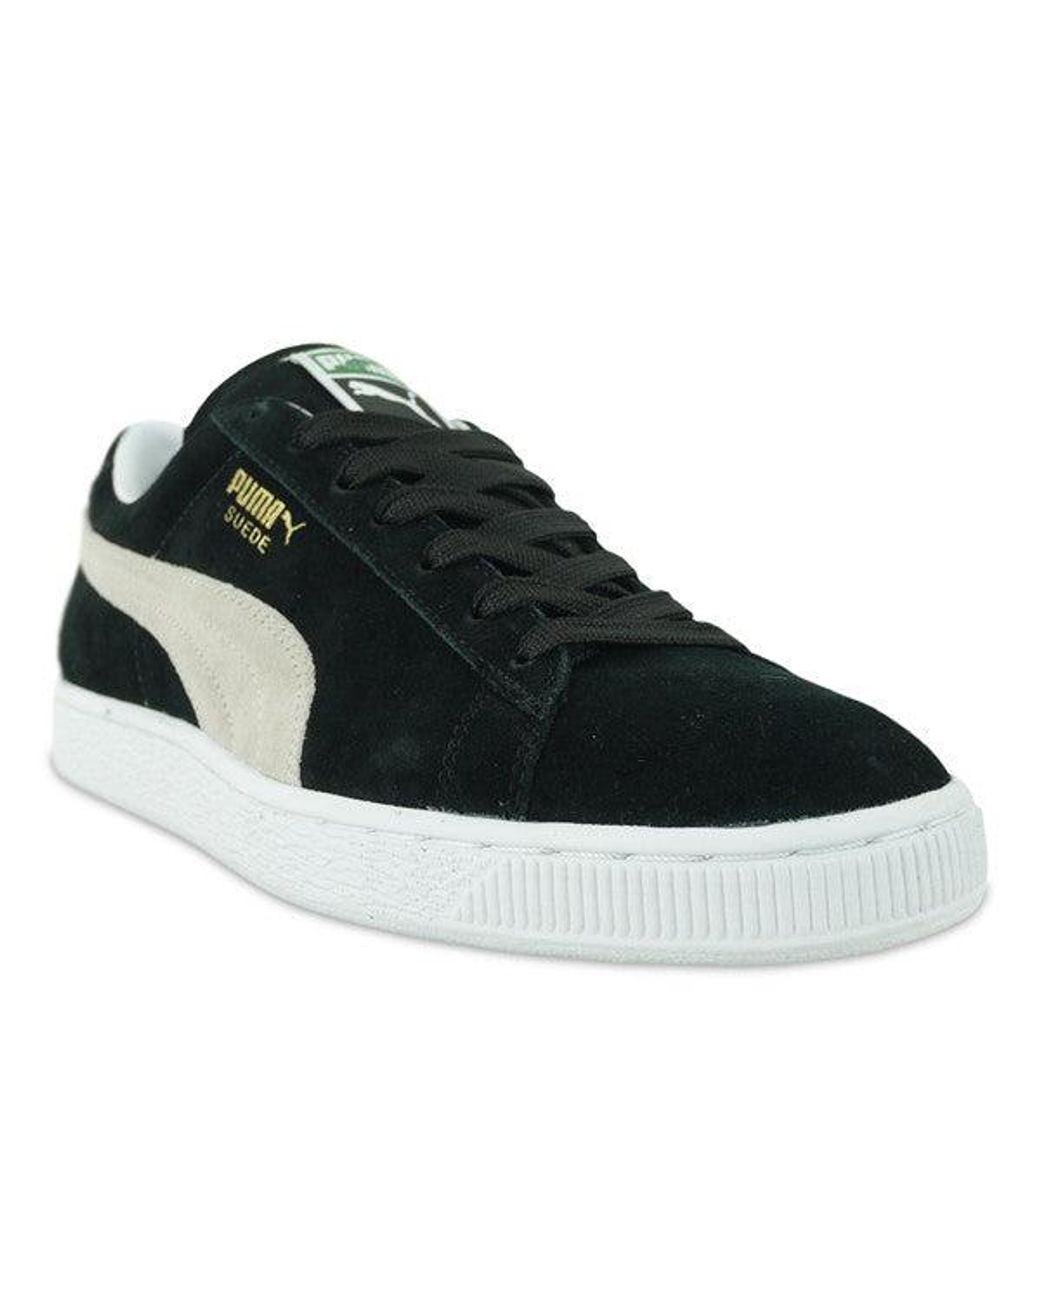 PUMA Suede Classic Trainers Black White for Men - Save 34% | Lyst